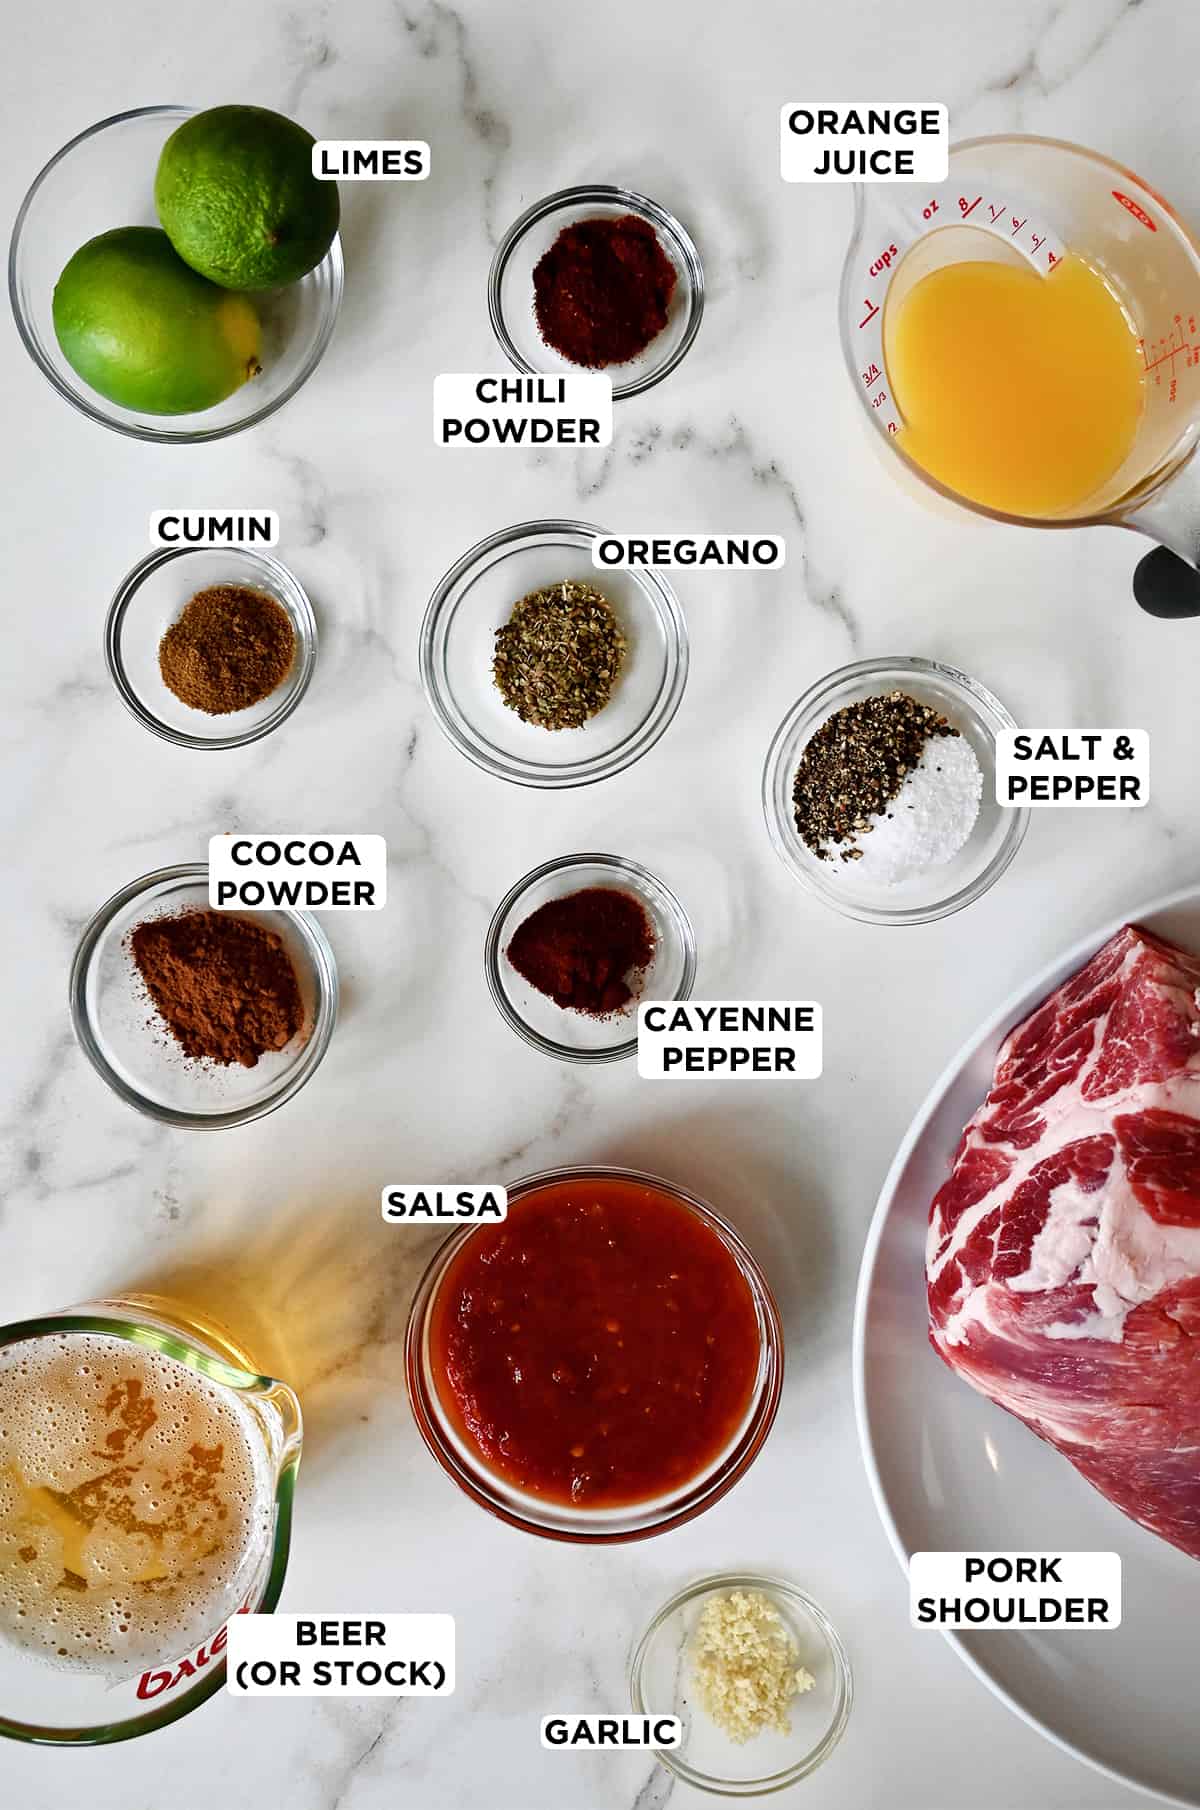 Small bowls of limes, chili powder, oregano, cumin, salt and pepper, cocoa powder, cayenne pepper, salsa and minced garlic on a marble countertop. Measuring cups containing beer and orange juice and plate with a pork shoulder on it are also on the countertop.